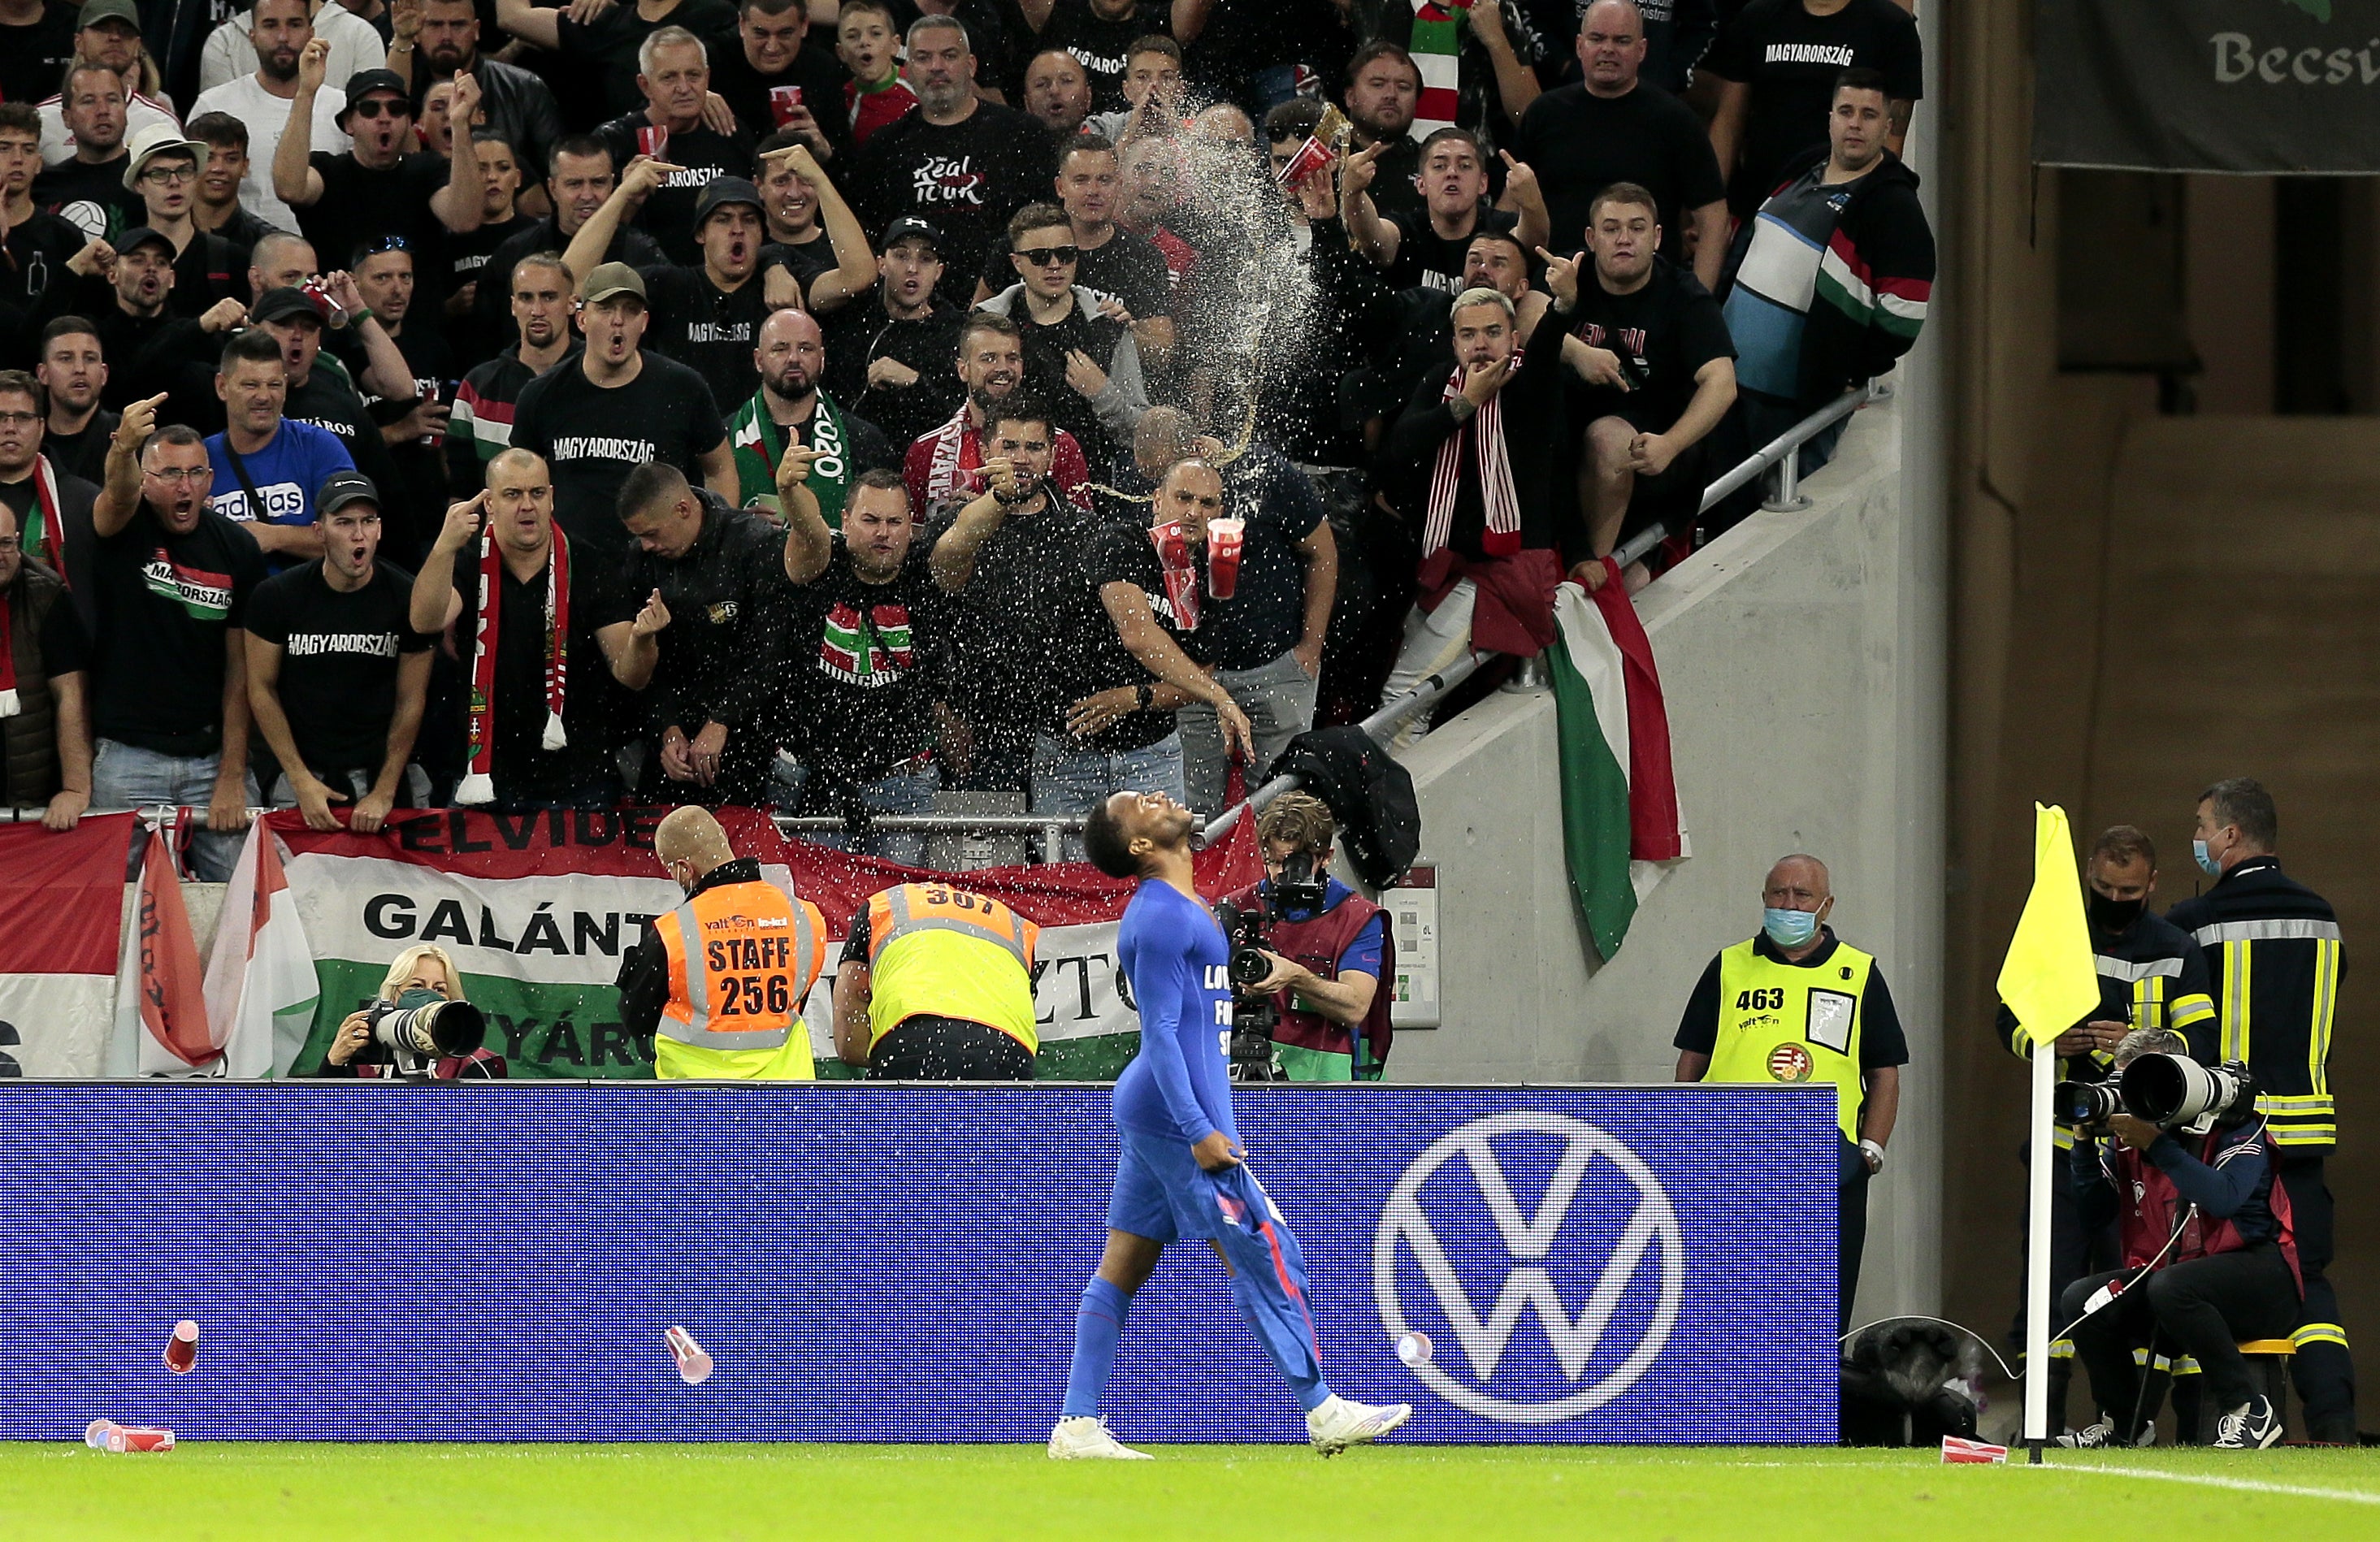 Raheem Sterling was among the England players targeted with monkey chants during the win in Hungary (Attila Trenka/PA)